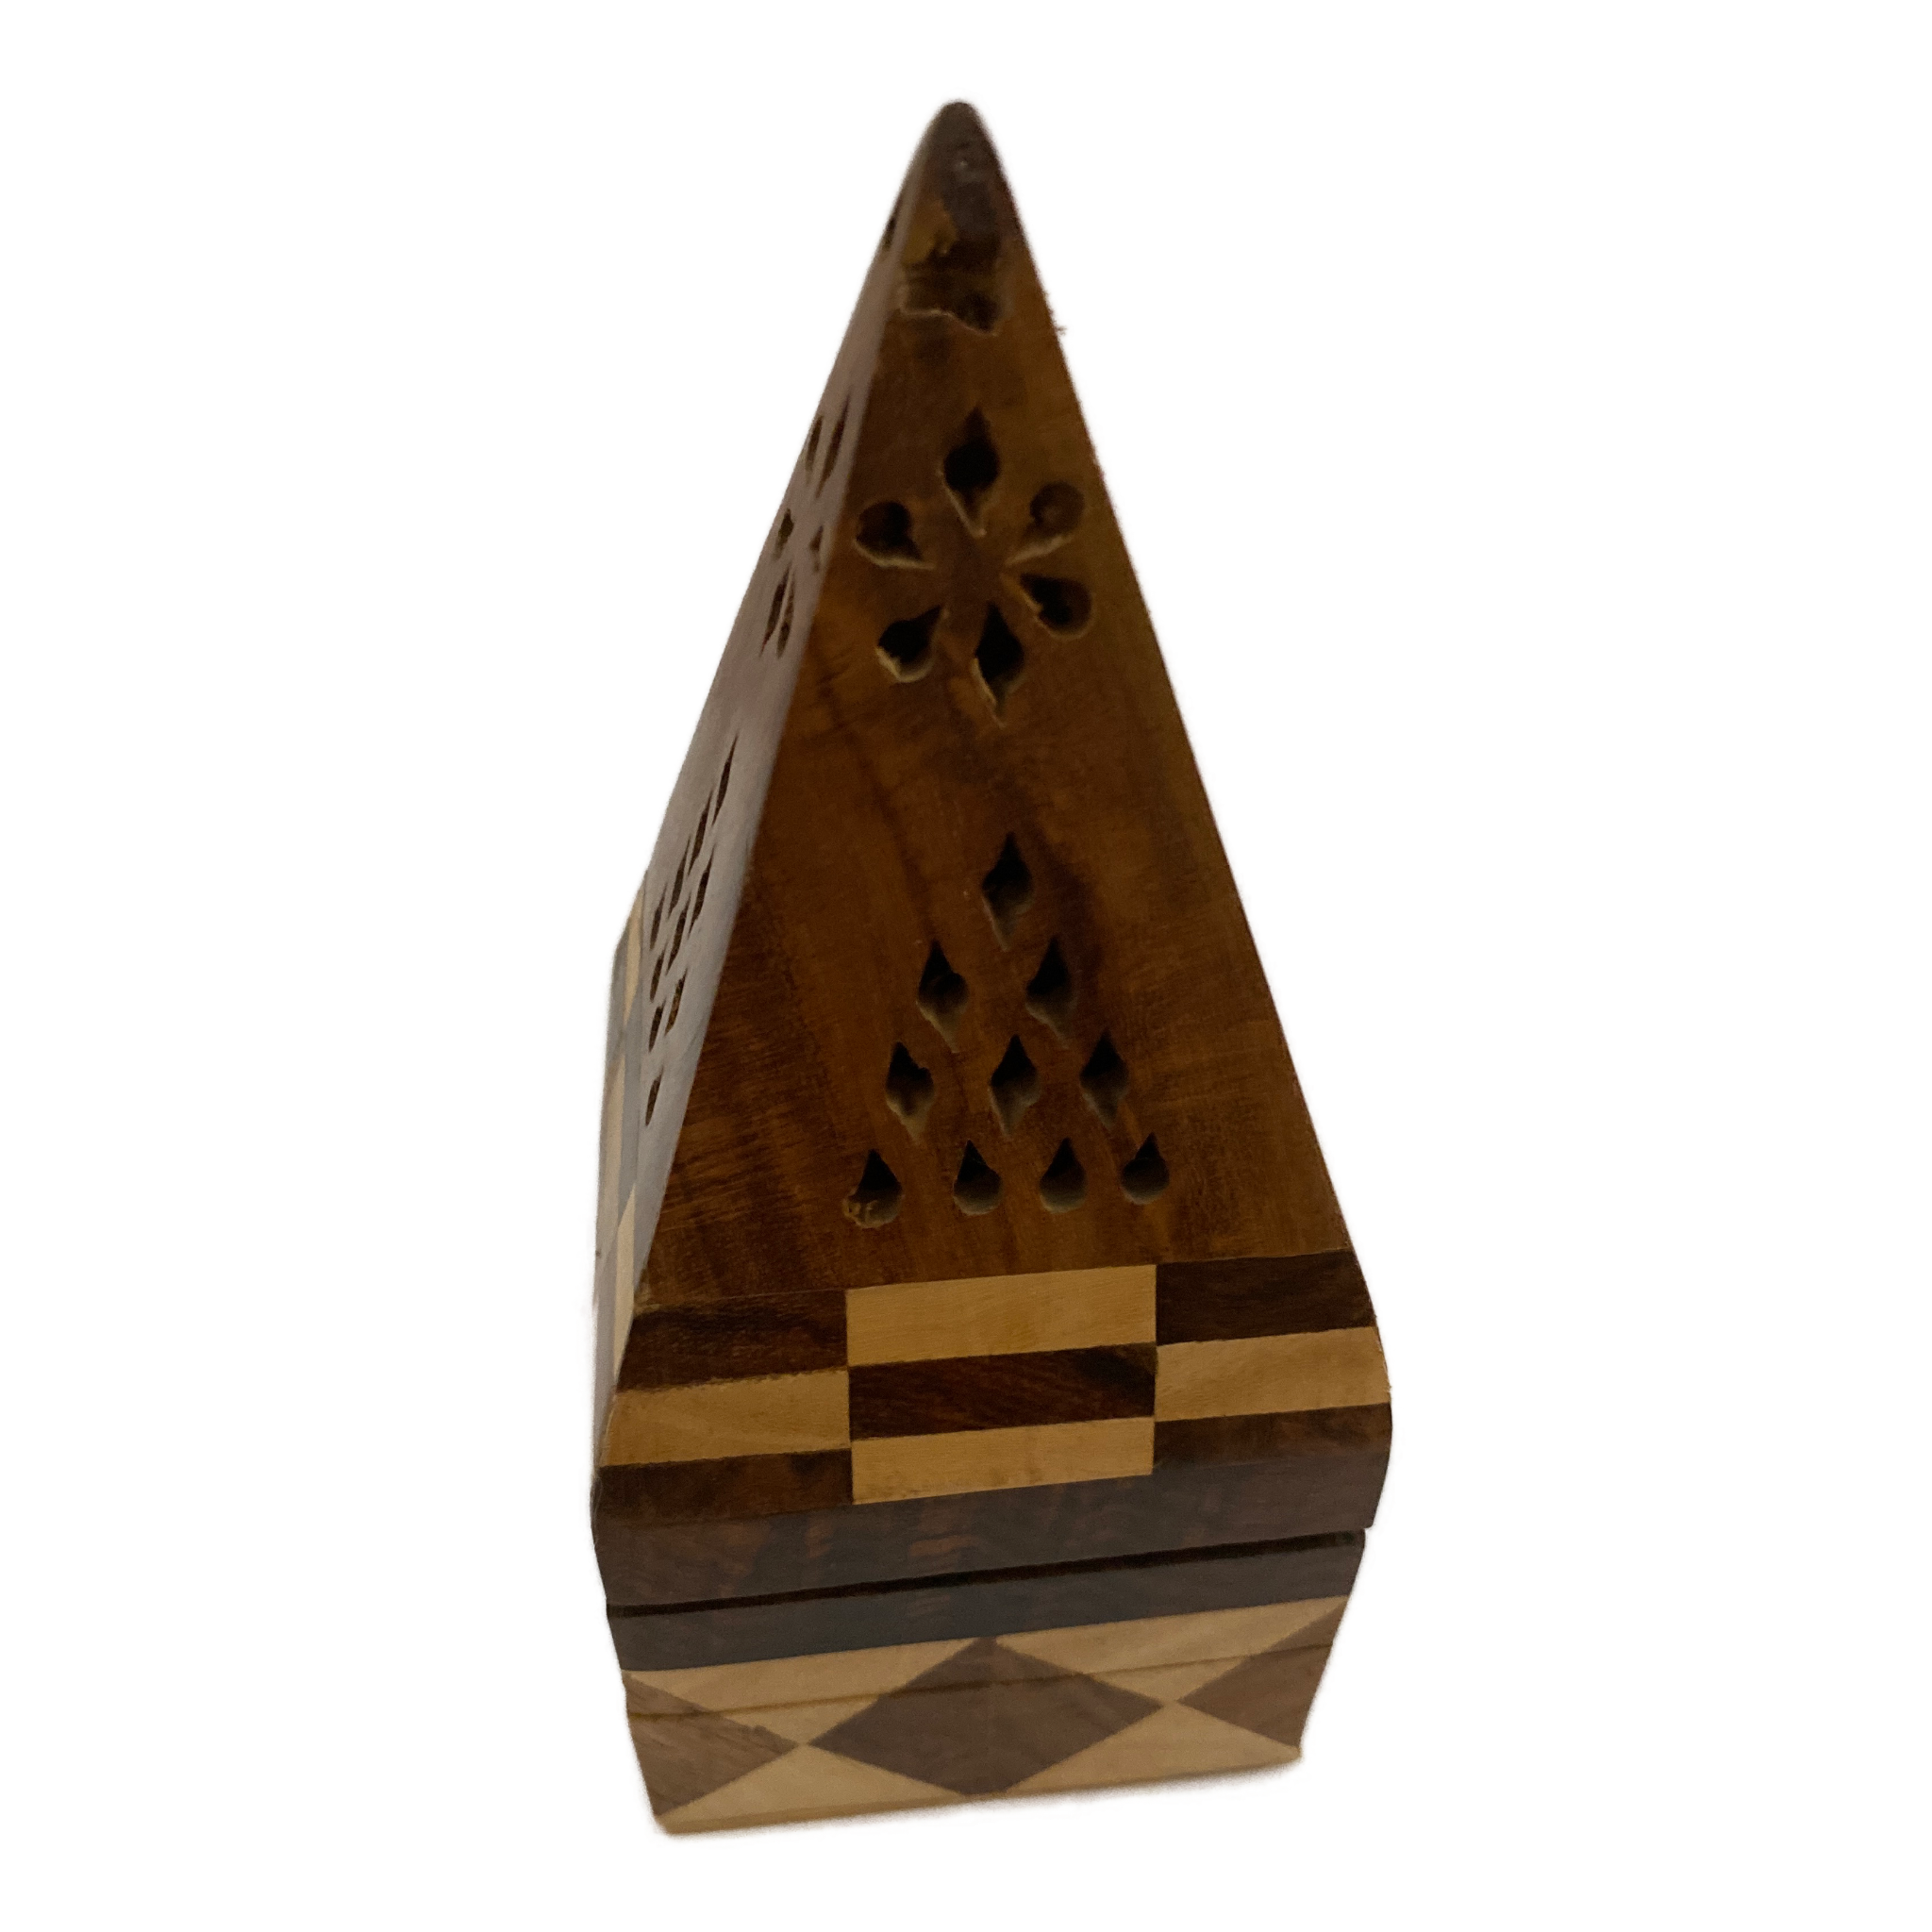 Square wood base with pyramid top with holes for smoke 